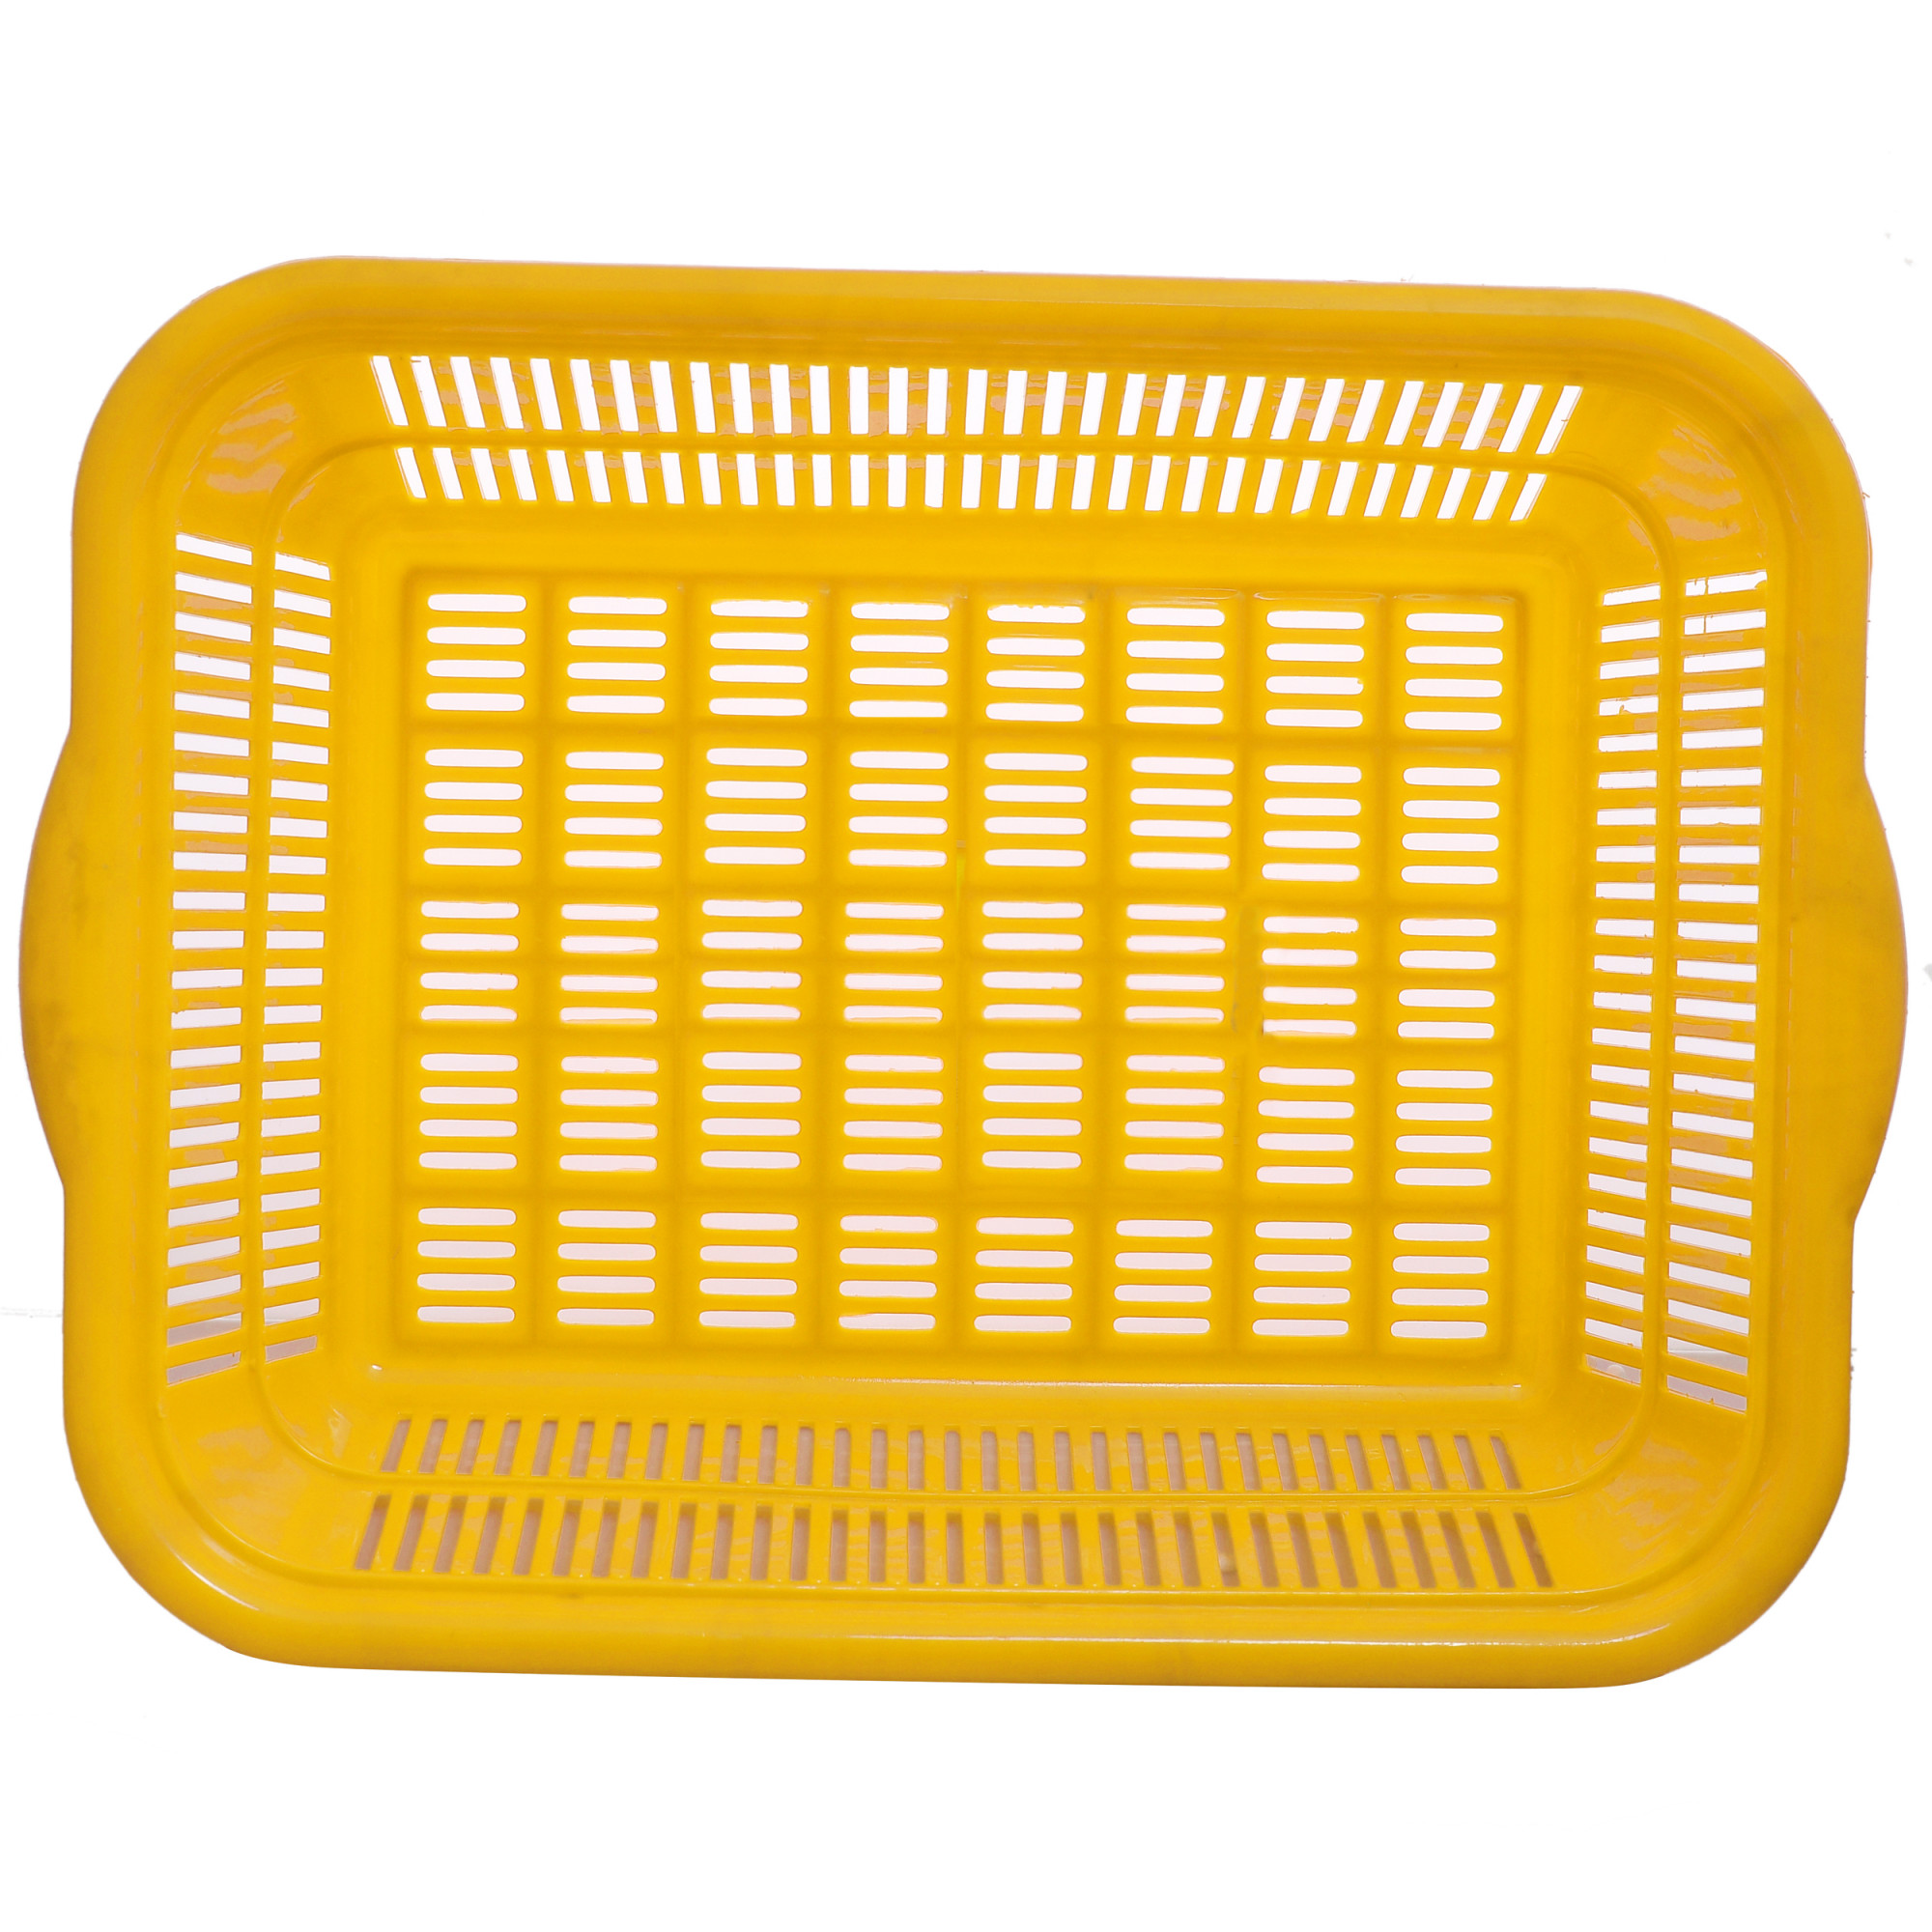 Kuber Industries Plastic Kitchen Dish Rack Drainer Vegetables And Fruits Basket Dish Rack Multipurpose Organizers ,Small Size,Blue & Yellow